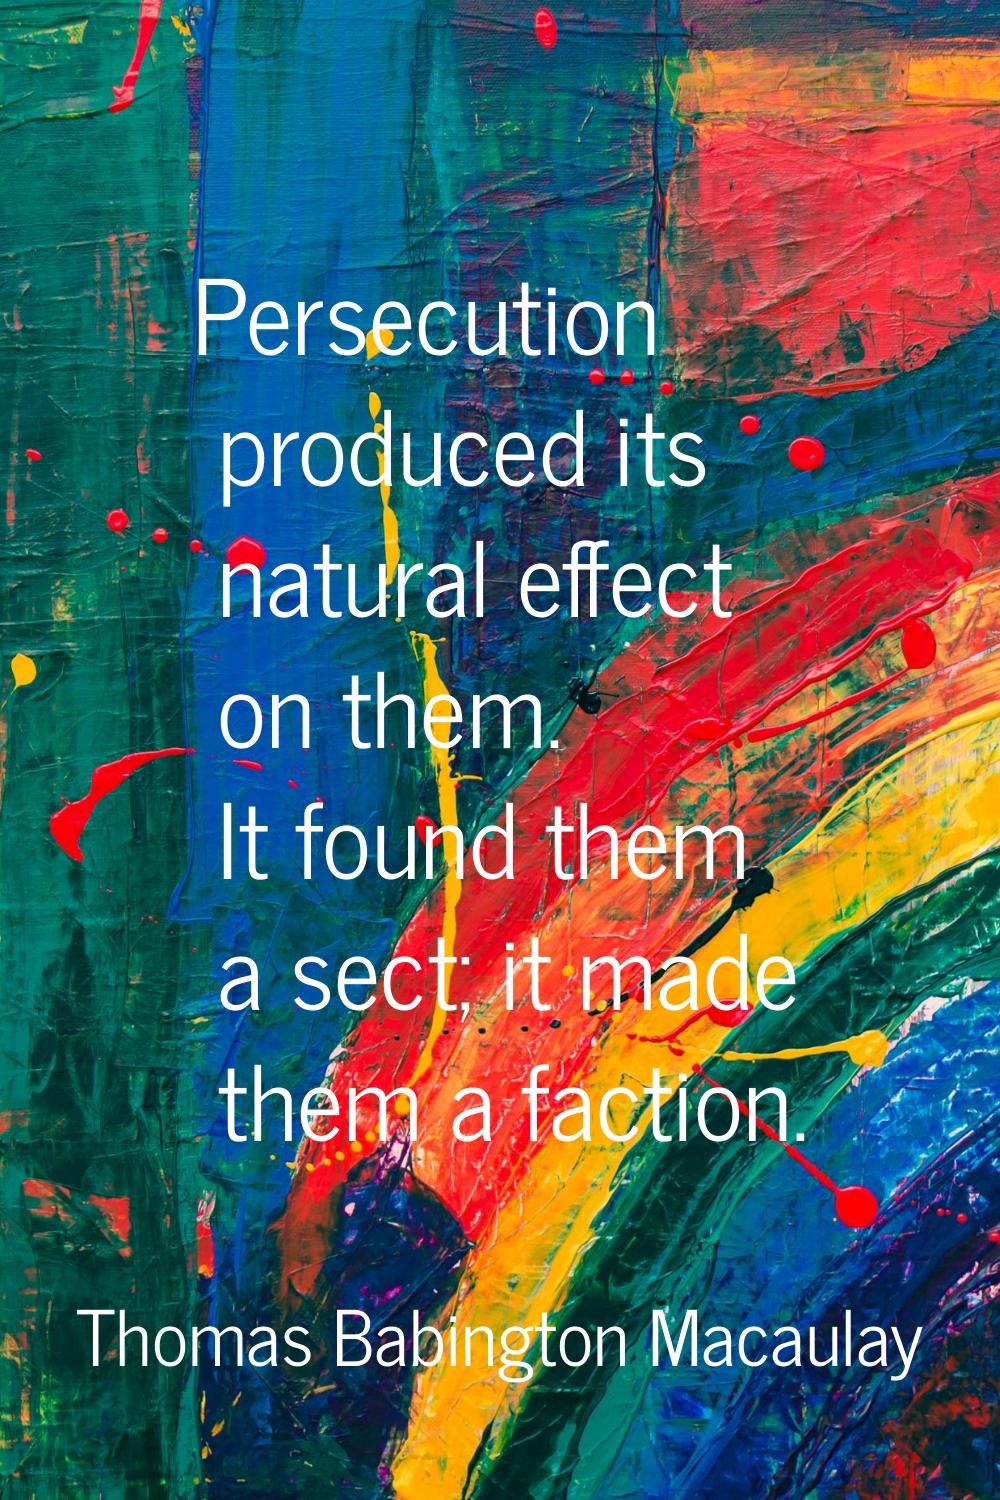 Persecution produced its natural effect on them. It found them a sect; it made them a faction.